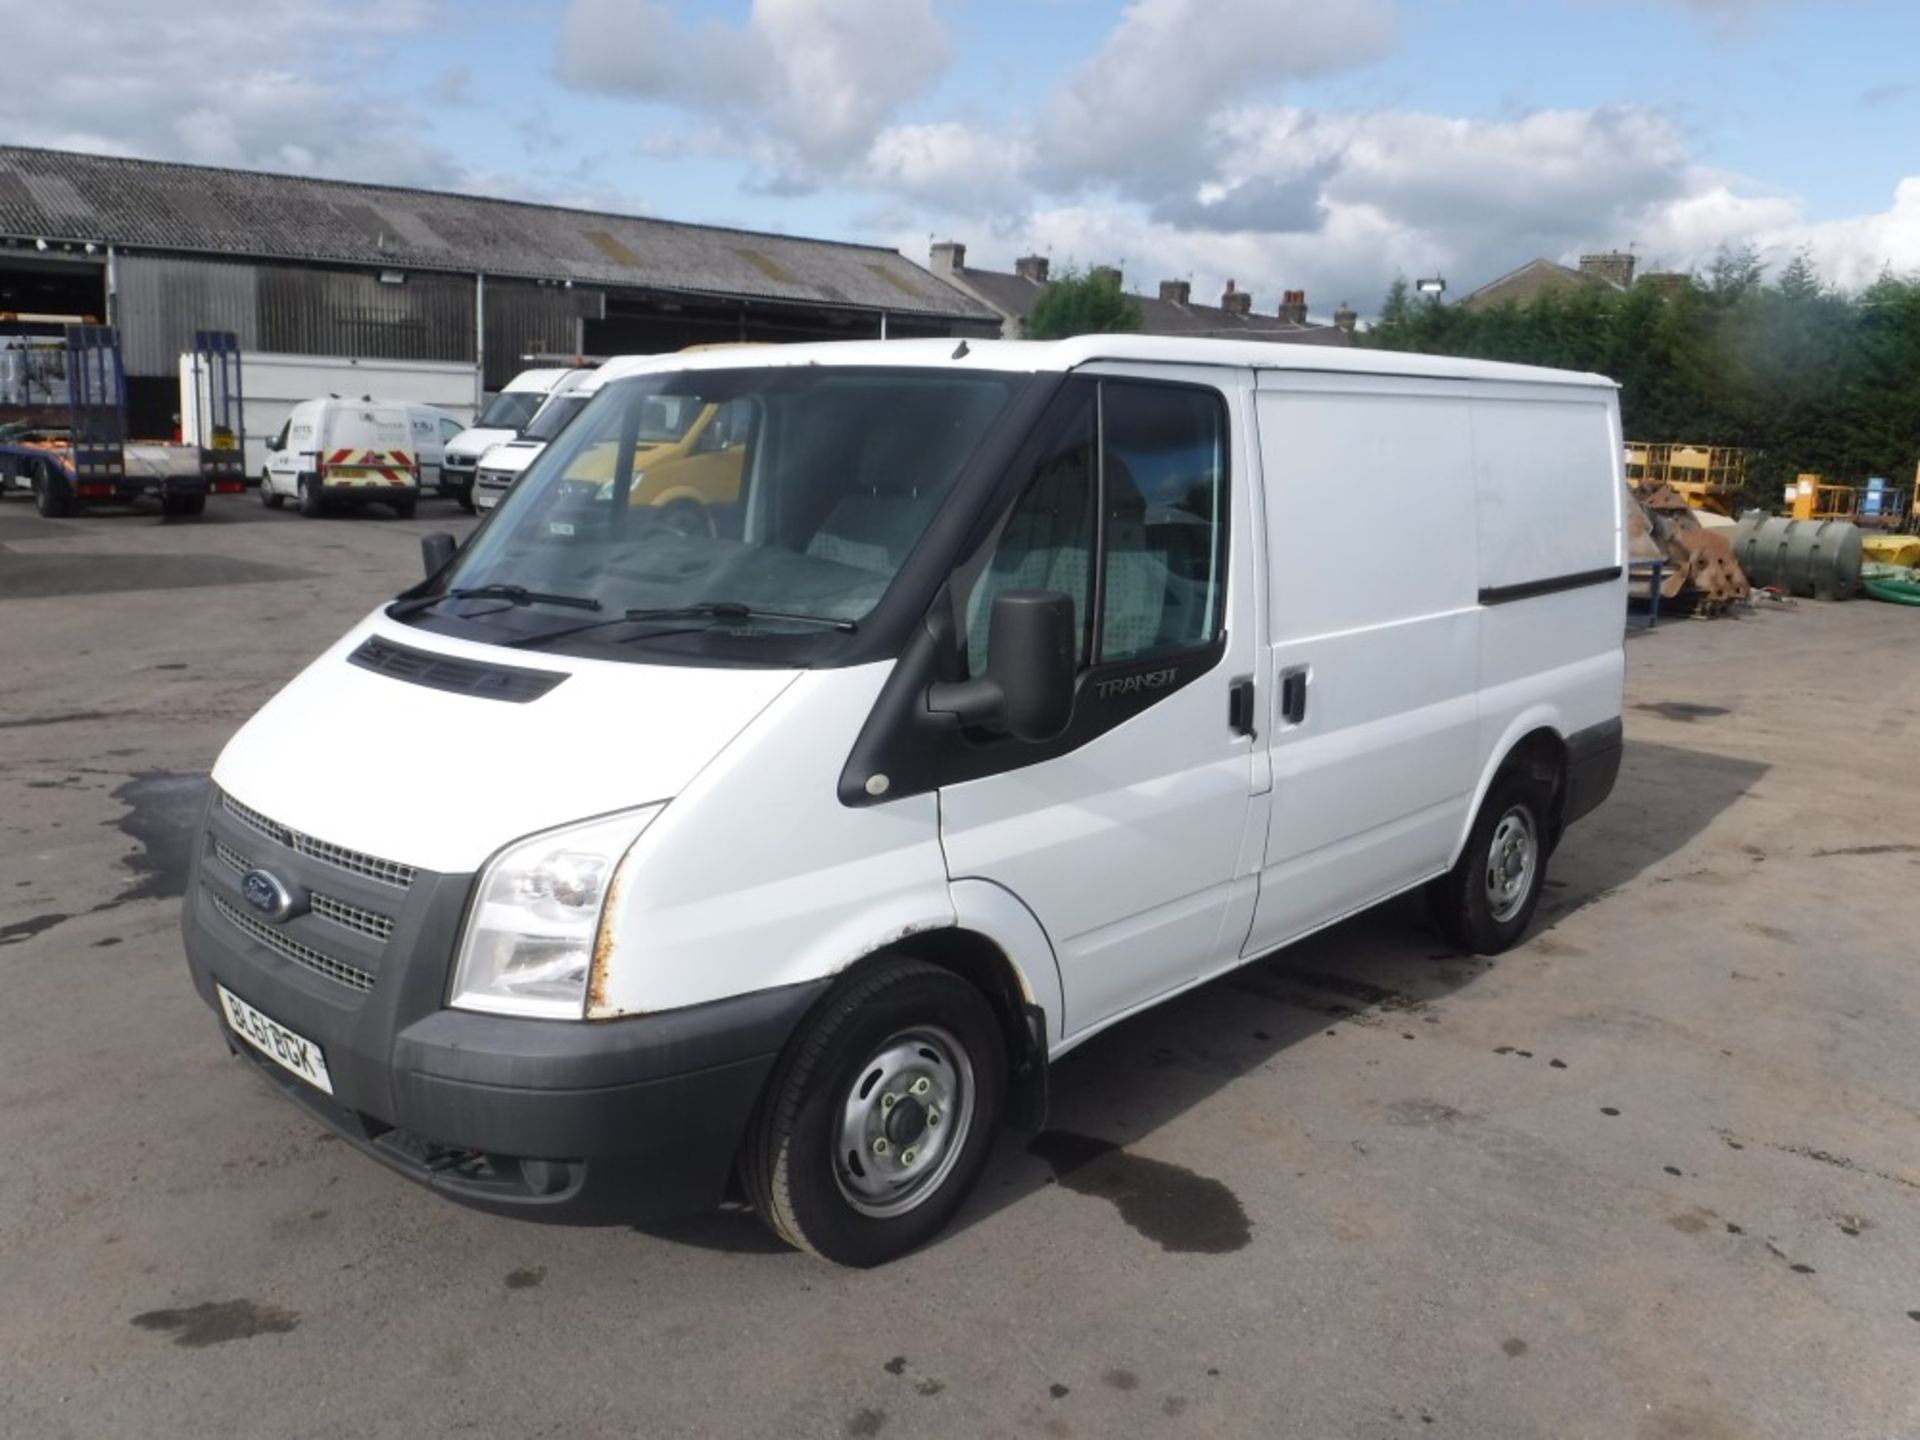 61 reg FORD TRANSIT 100 T280 FWD, 1ST REG 02/12, TEST 01/19, 120903M, V5 HERE, 1 OWNER FROM NEW [+ - Image 2 of 5